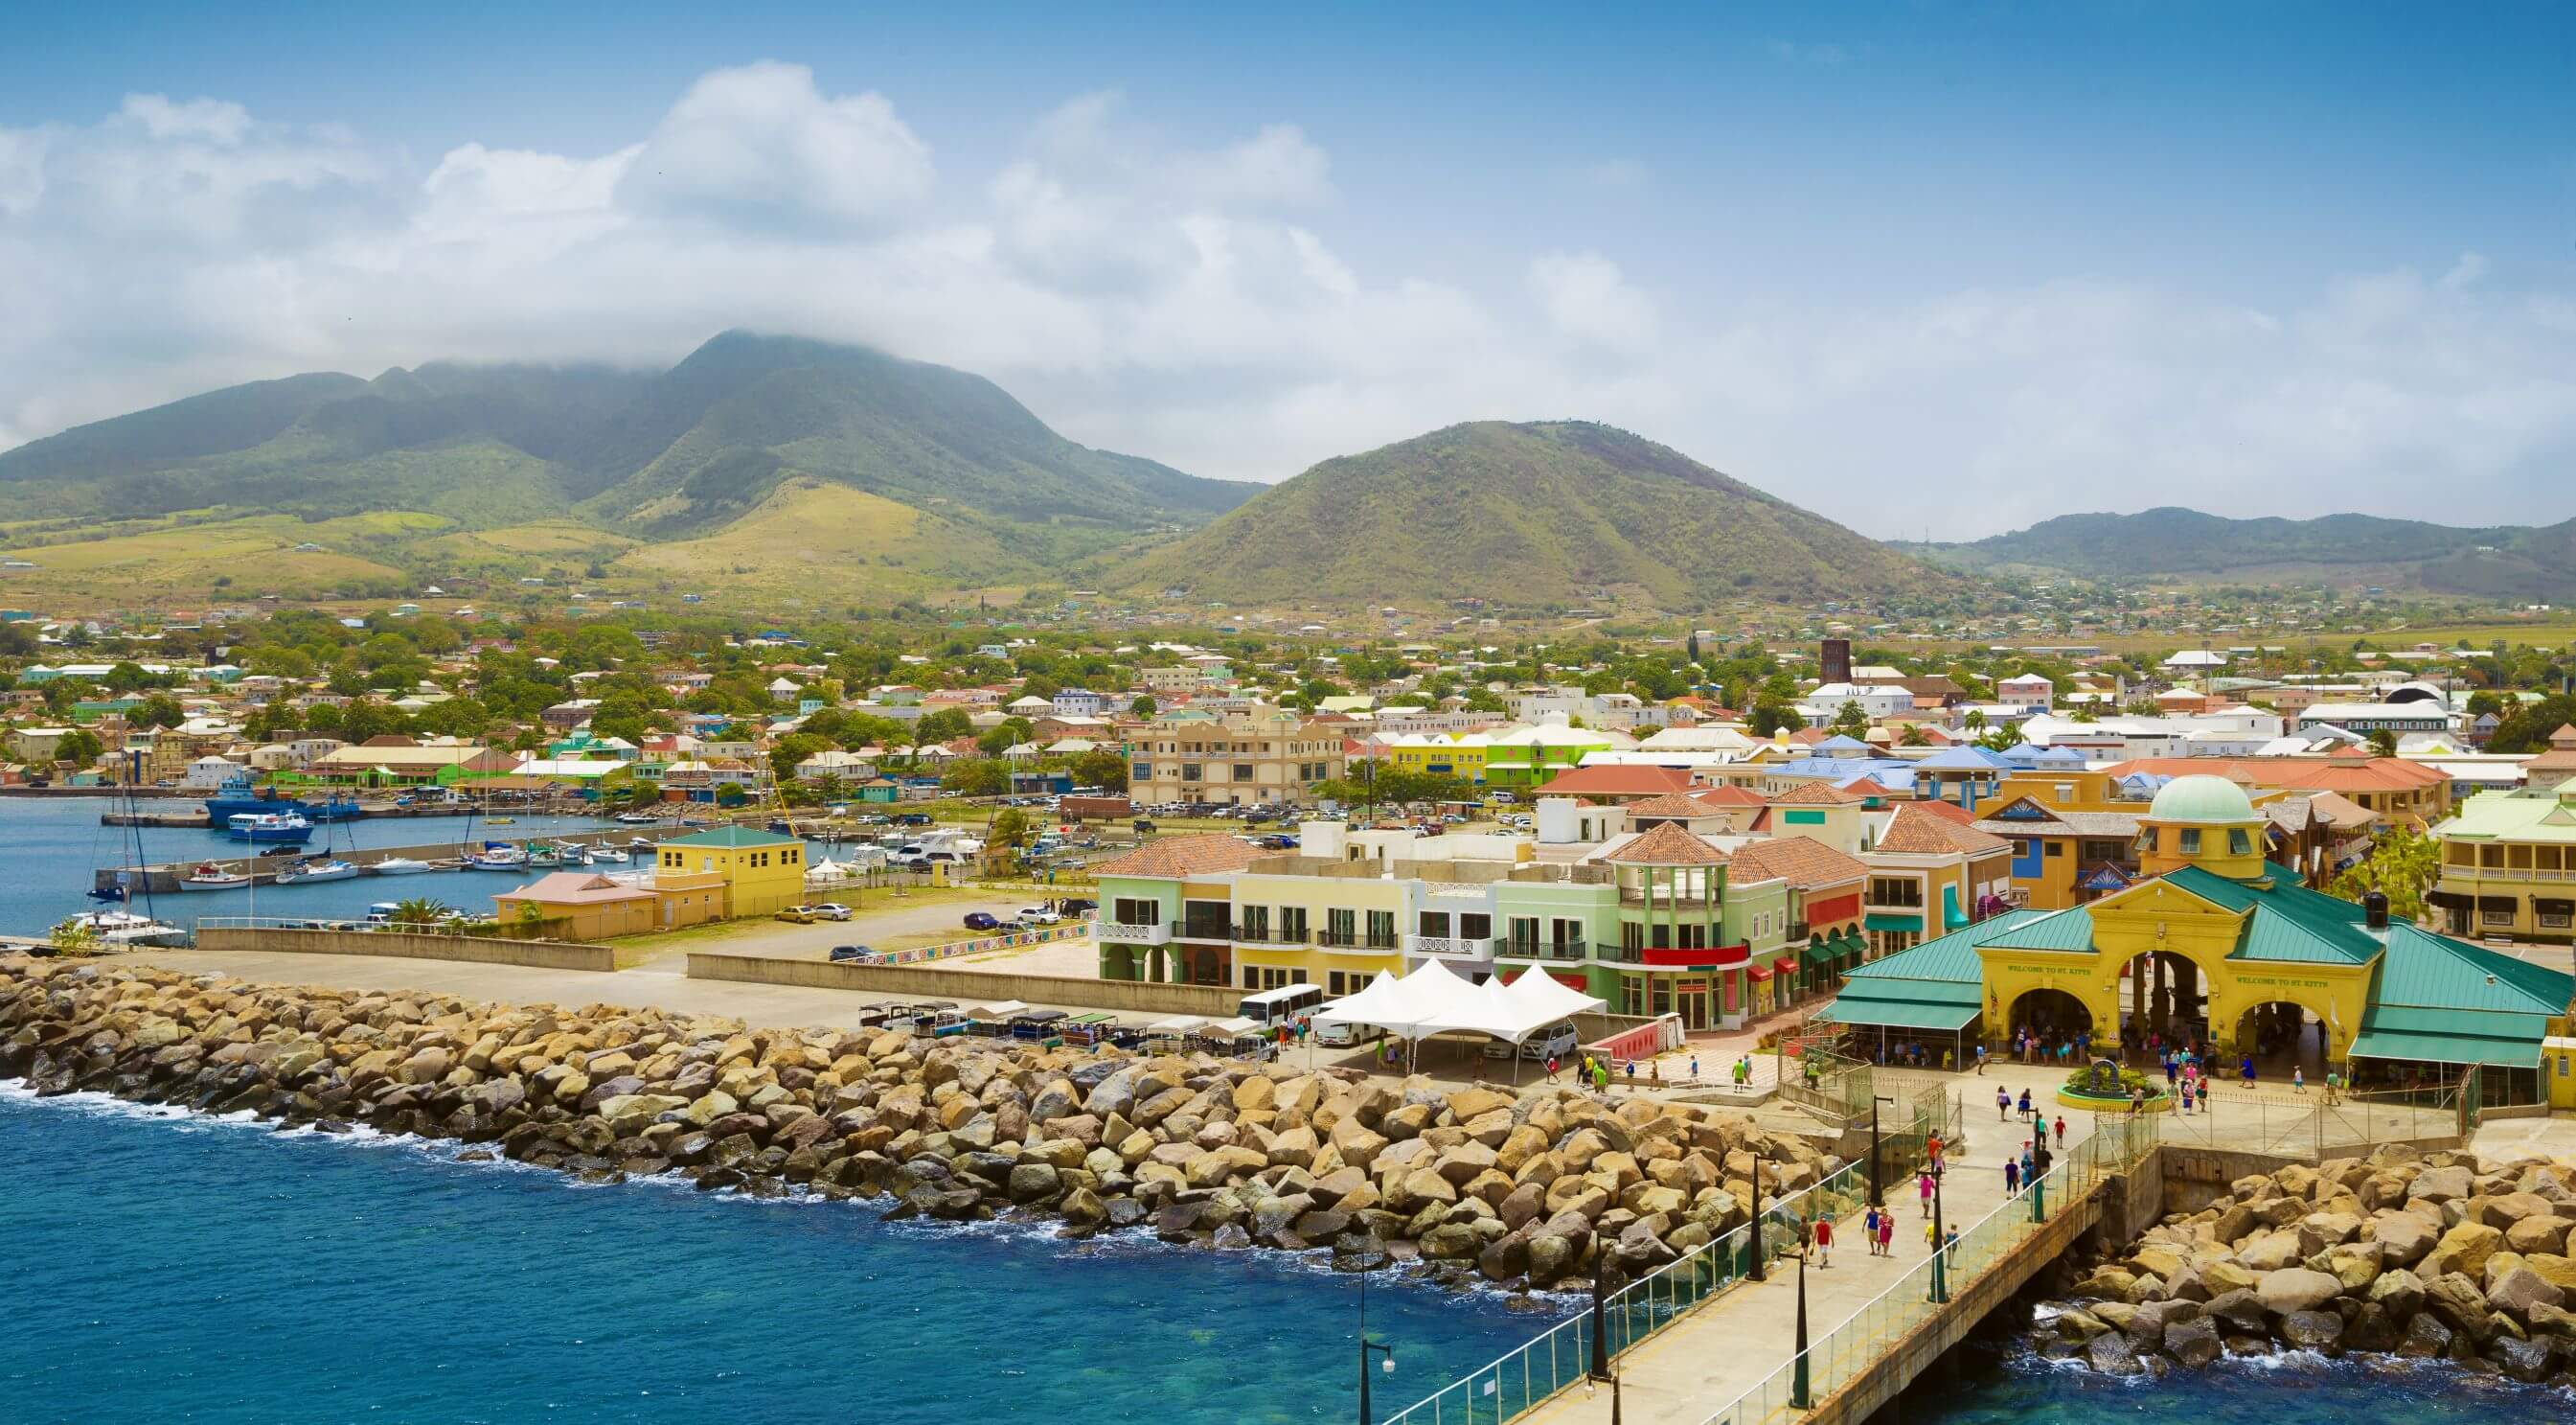 Port Zante in Basseterrre town, St. Kitts and Nevis